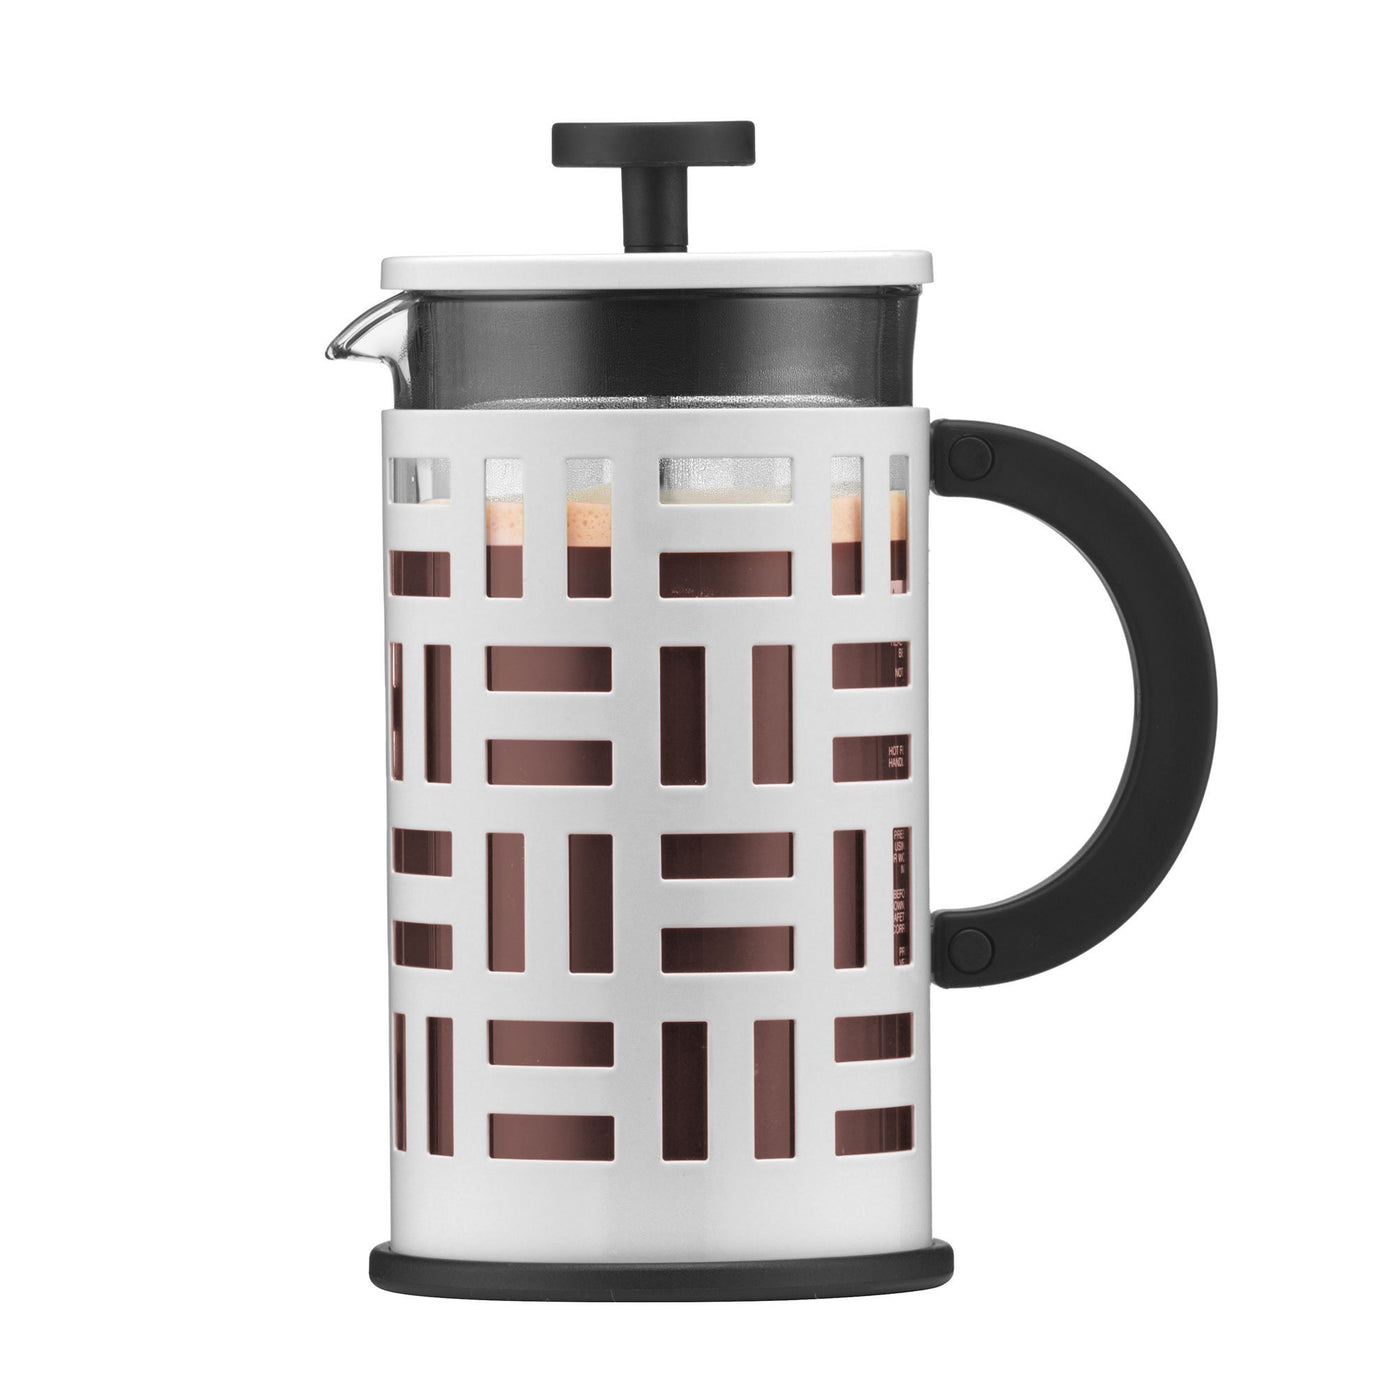 French Press Coffee Maker 34 Oz Large Stainless Steel+Glass Coffee